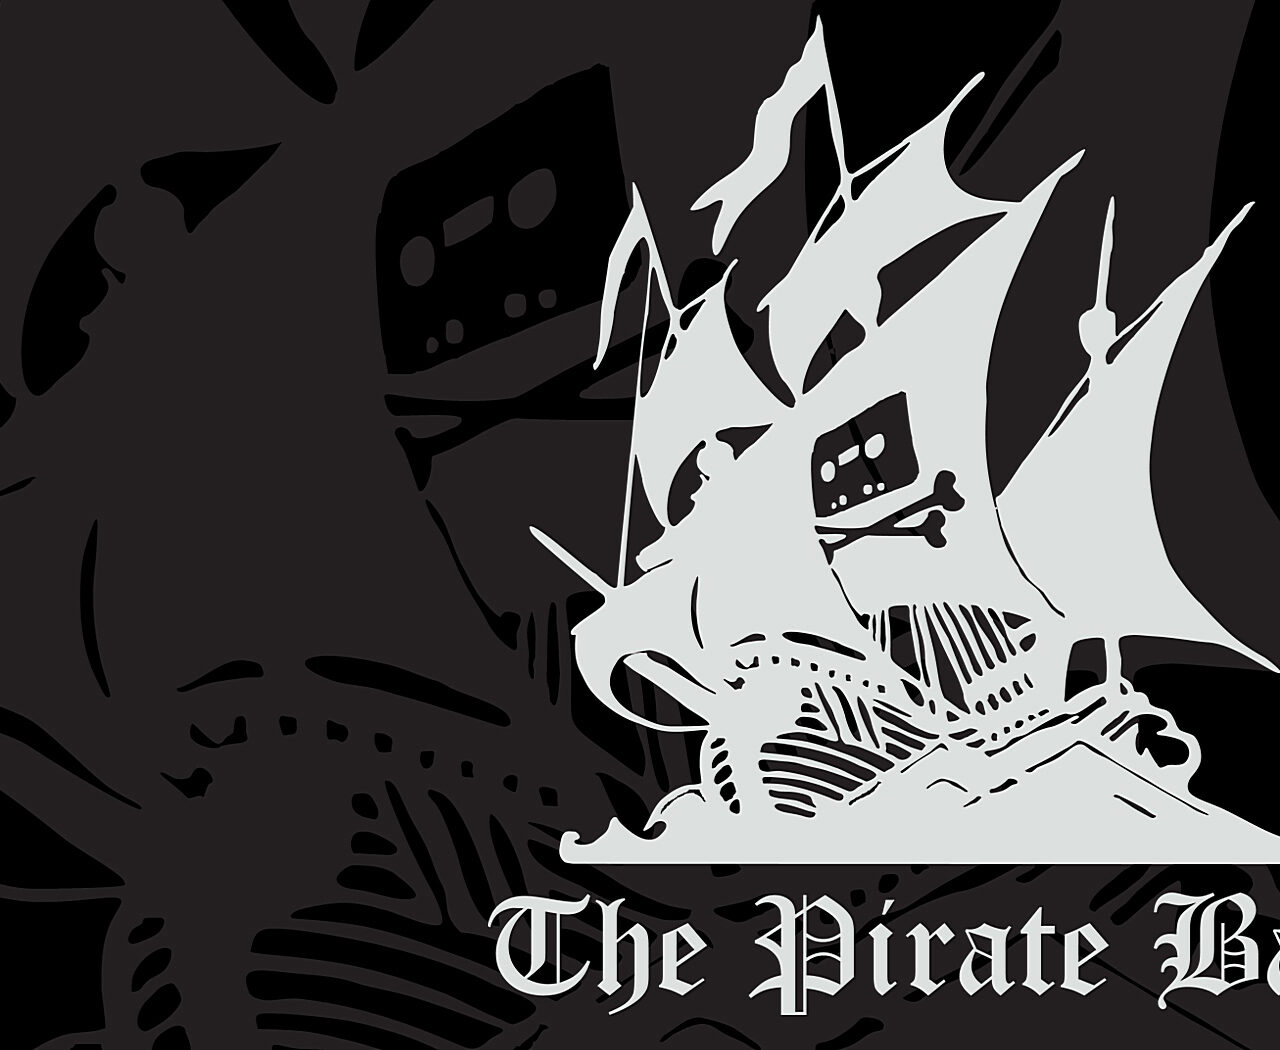 the_pirate_bay_by_keerochee